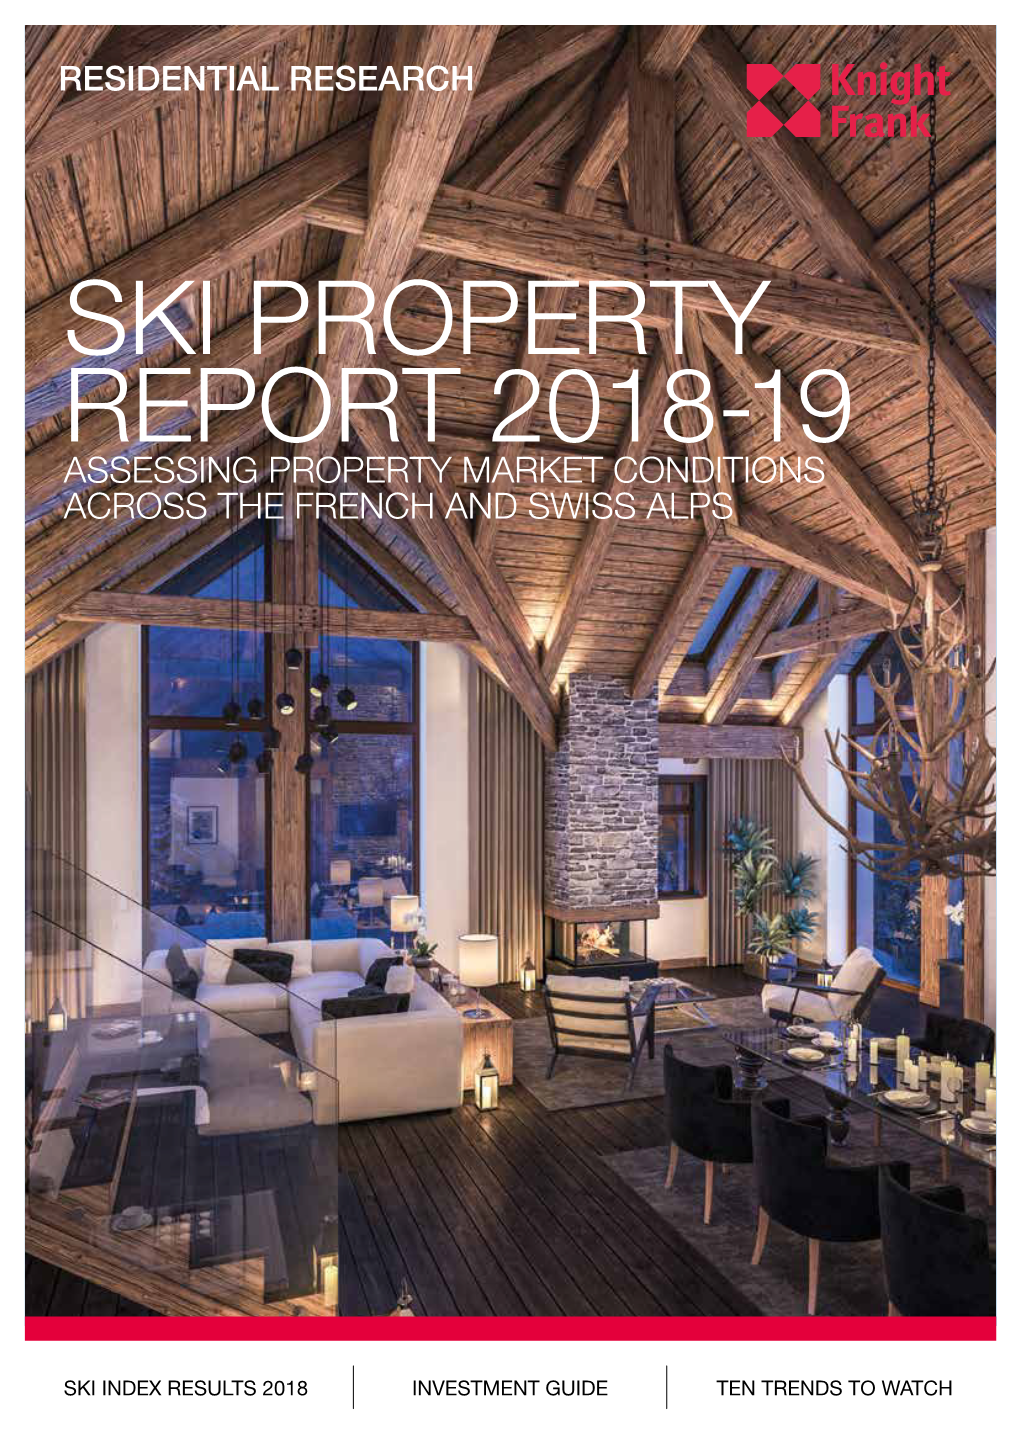 Ski Property Report 2018-19 Assessing Property Market Conditions Across the French and Swiss Alps